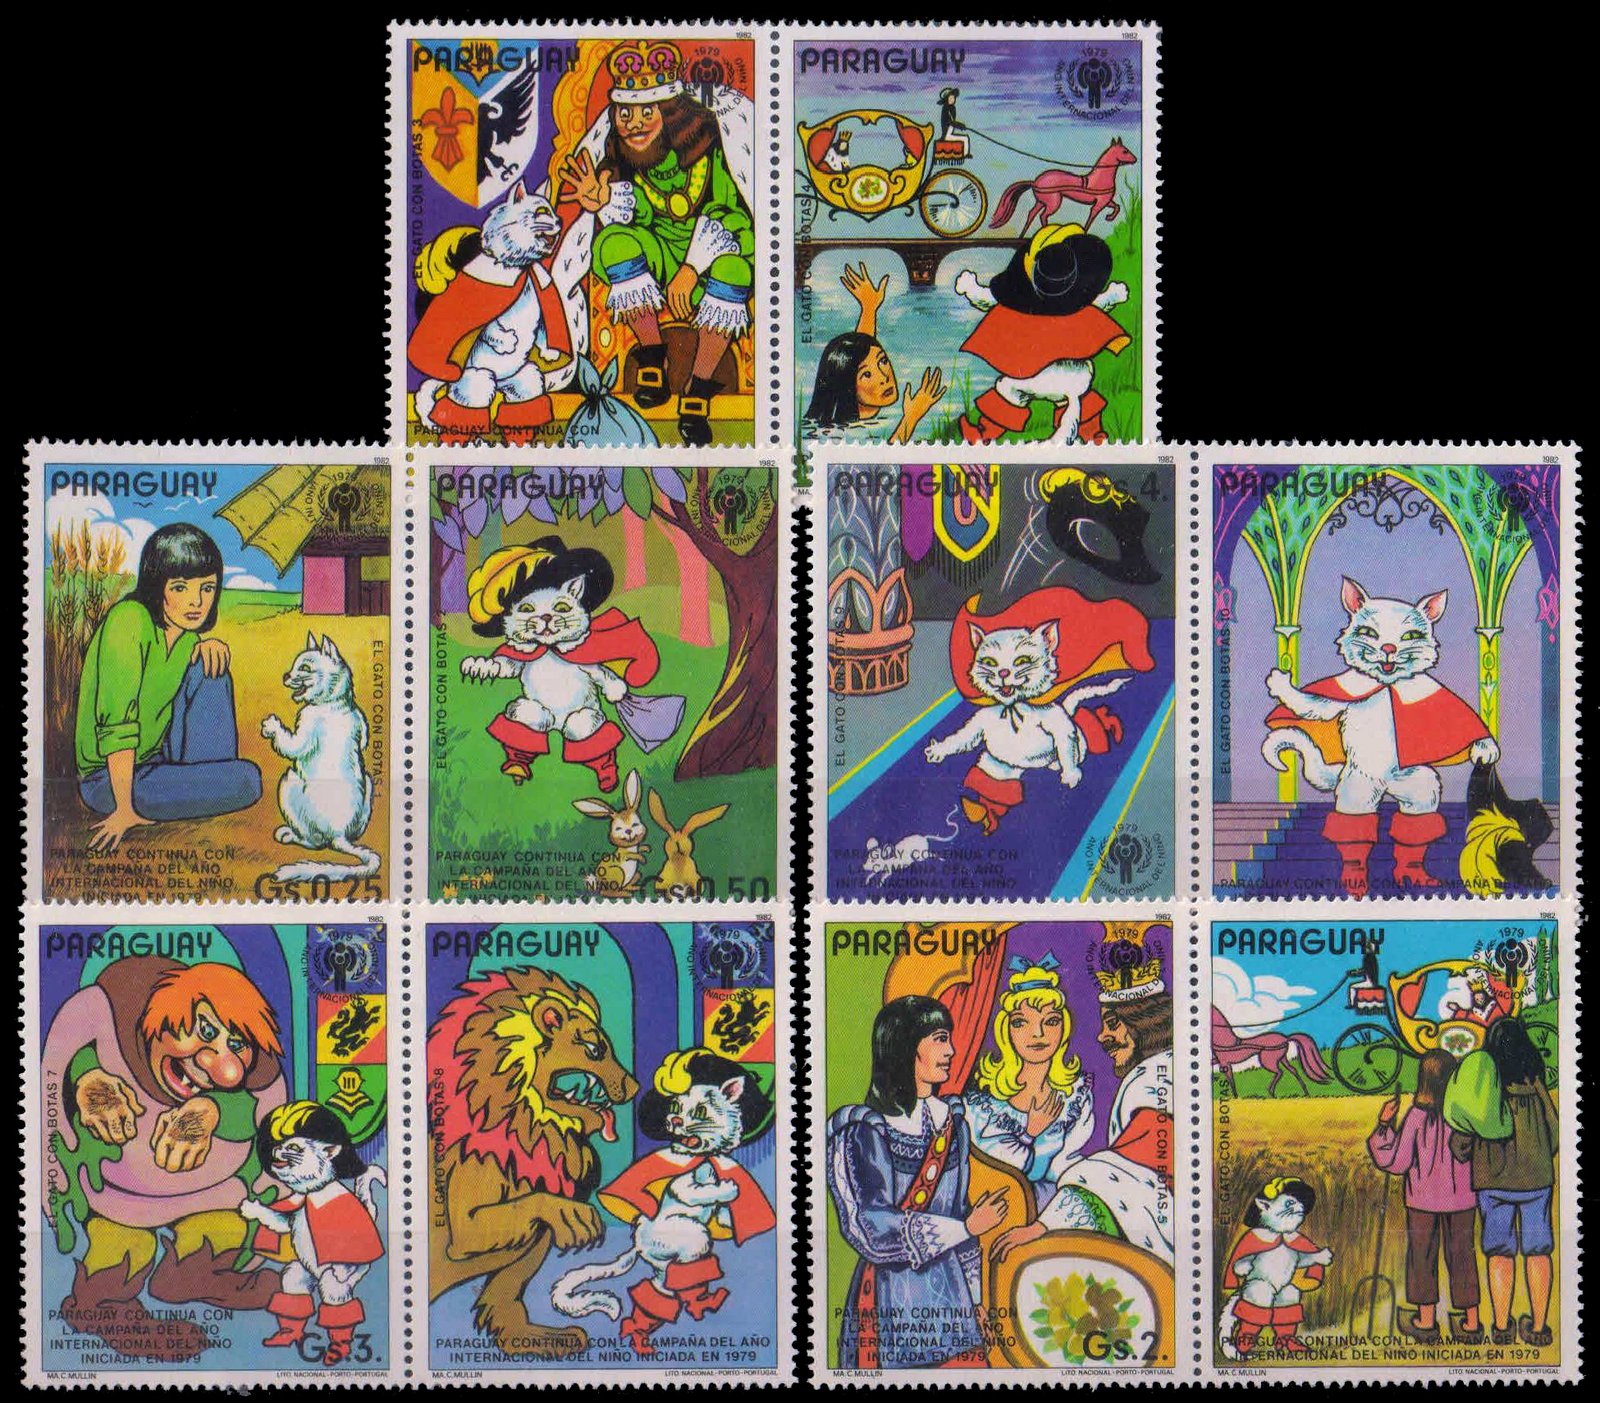 PARAGUAY 1982-Cartoon Stamps, Inter Year of the Child, Set of 6+4 Labels, MNH, Scott No. 2030-abc